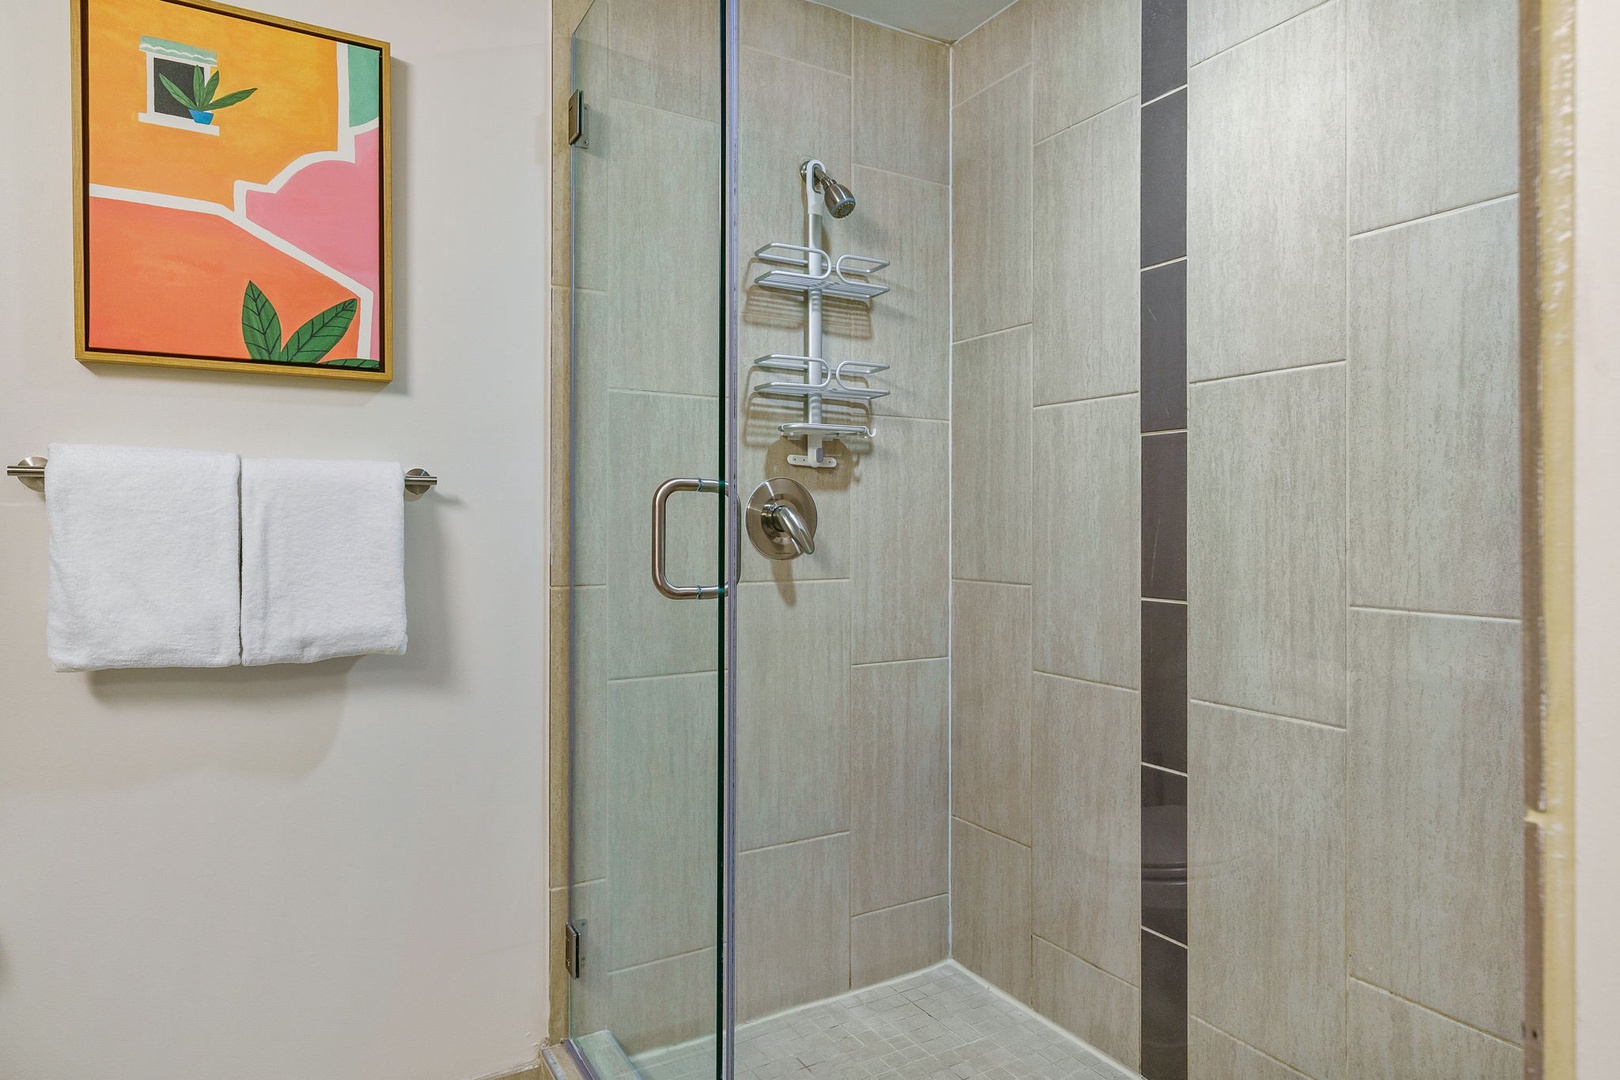 Feel invigorated in the modern walk-in shower with sleek fixtures.